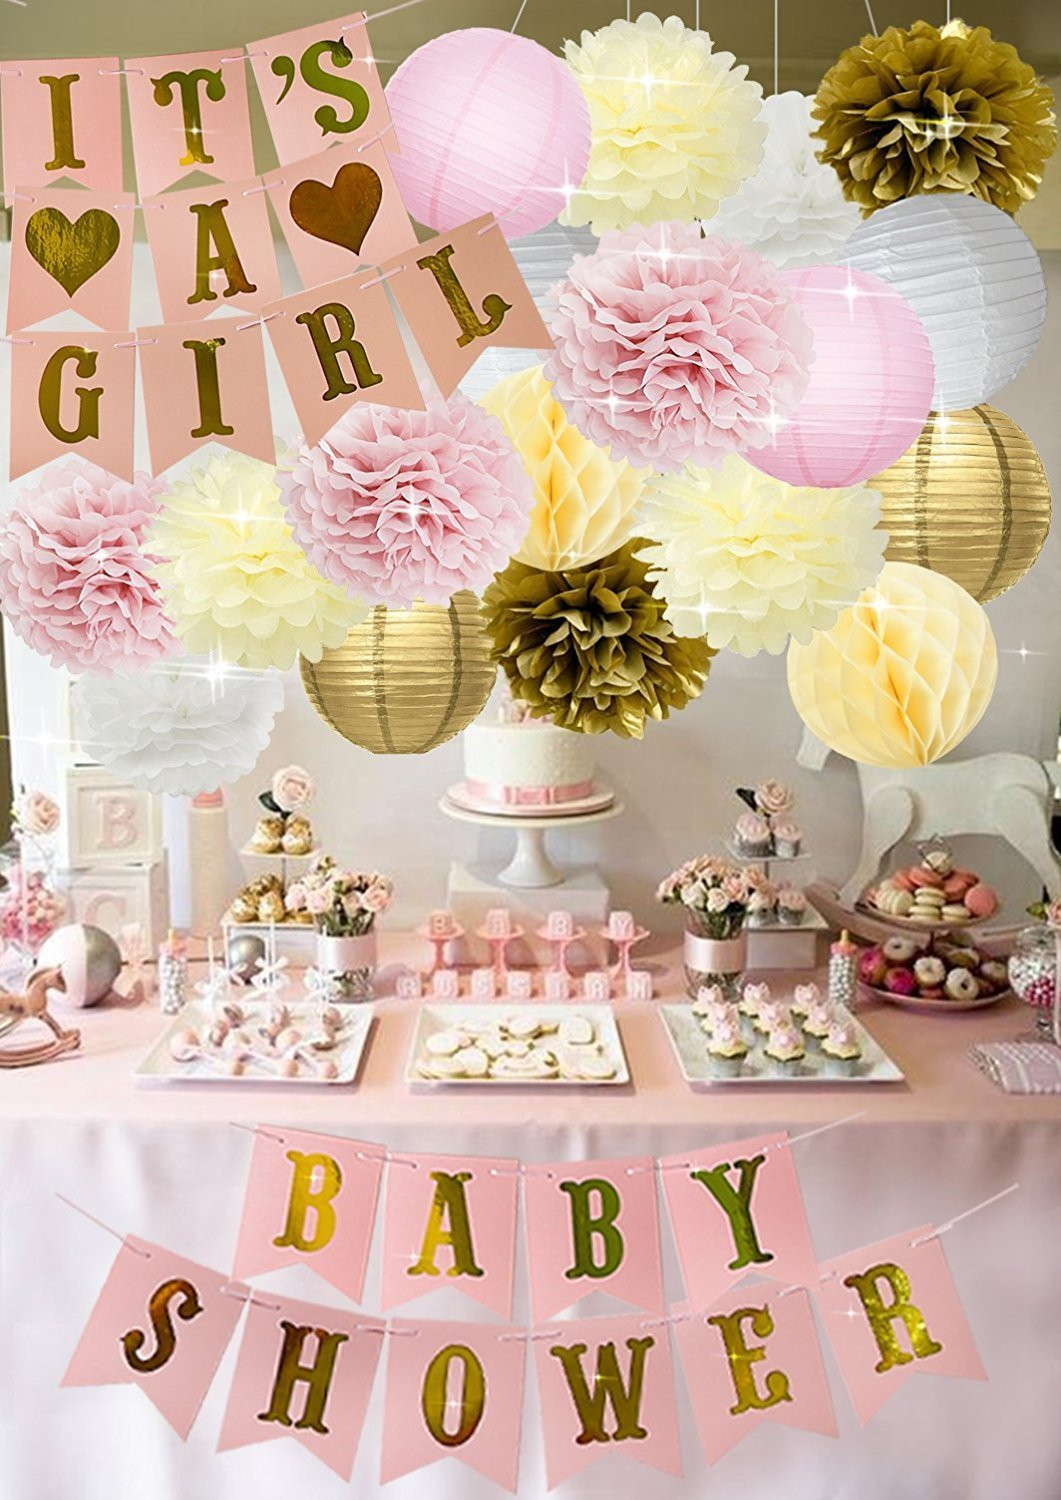 Girl Baby Shower Decorating Ideas
 Baby Shower Decorations BABY SHOWER IT S A GIRL Garland